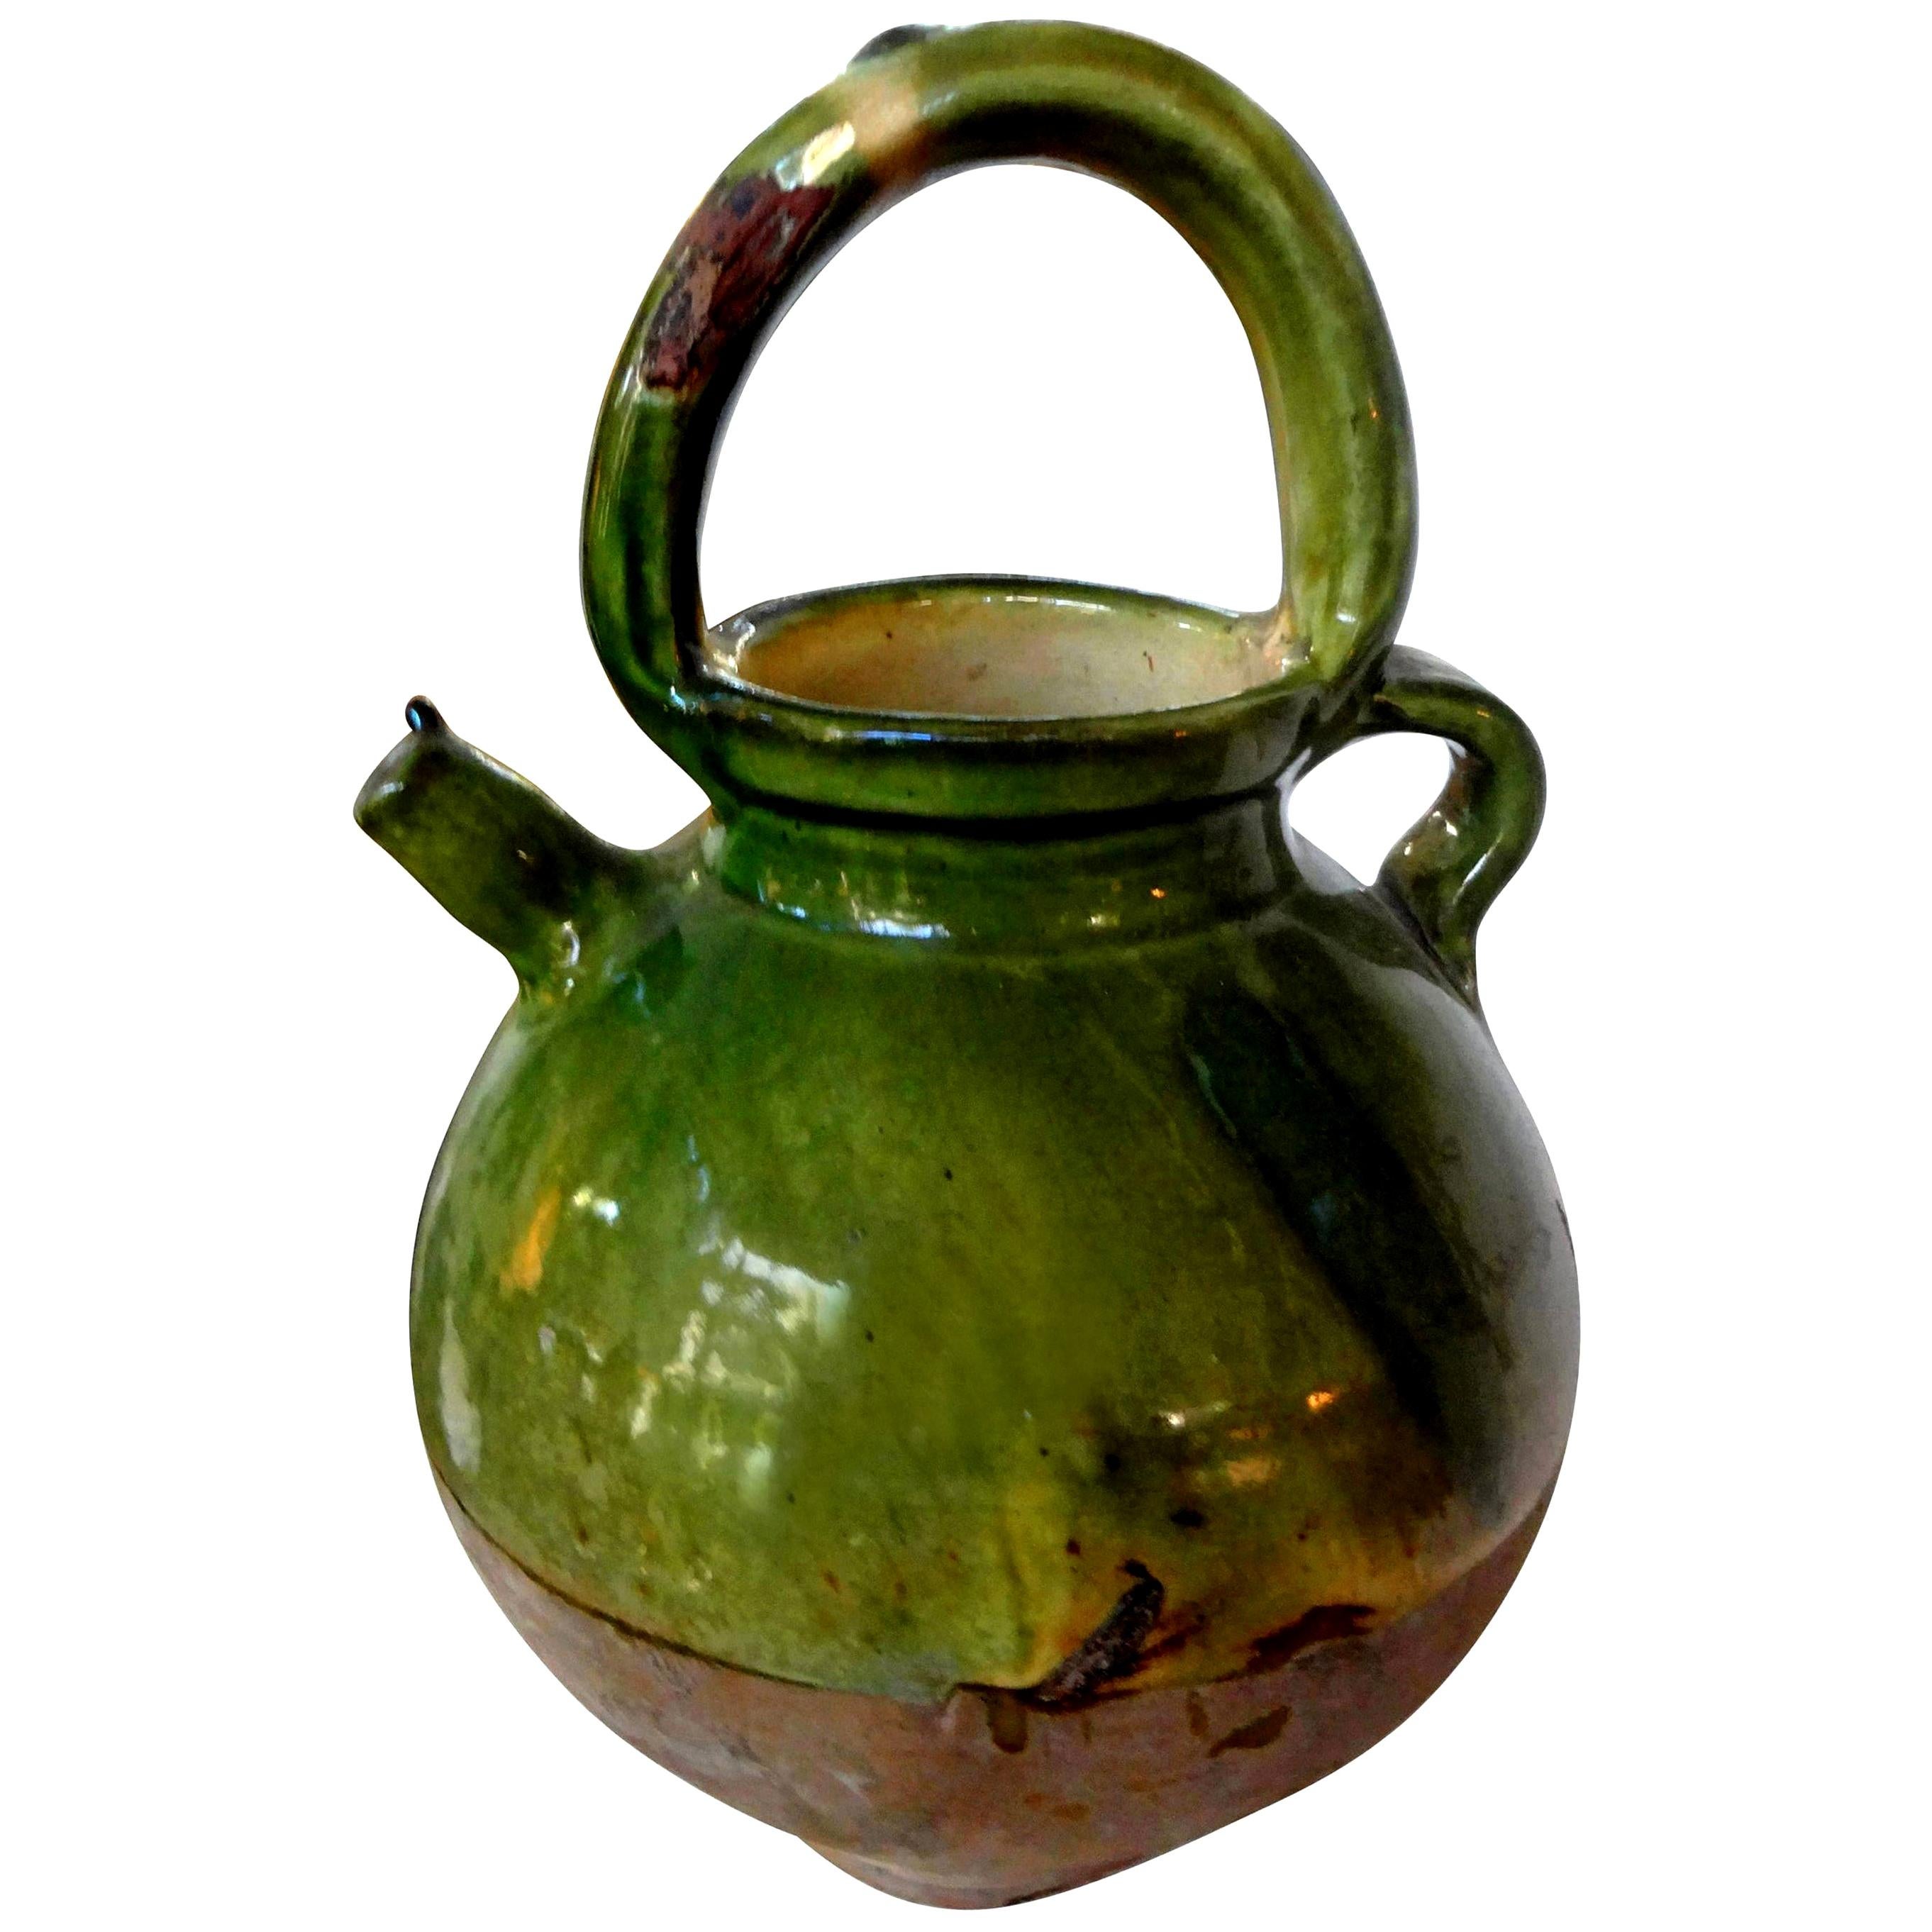 19th Century French Glazed Terracotta Vessel or Pitcher